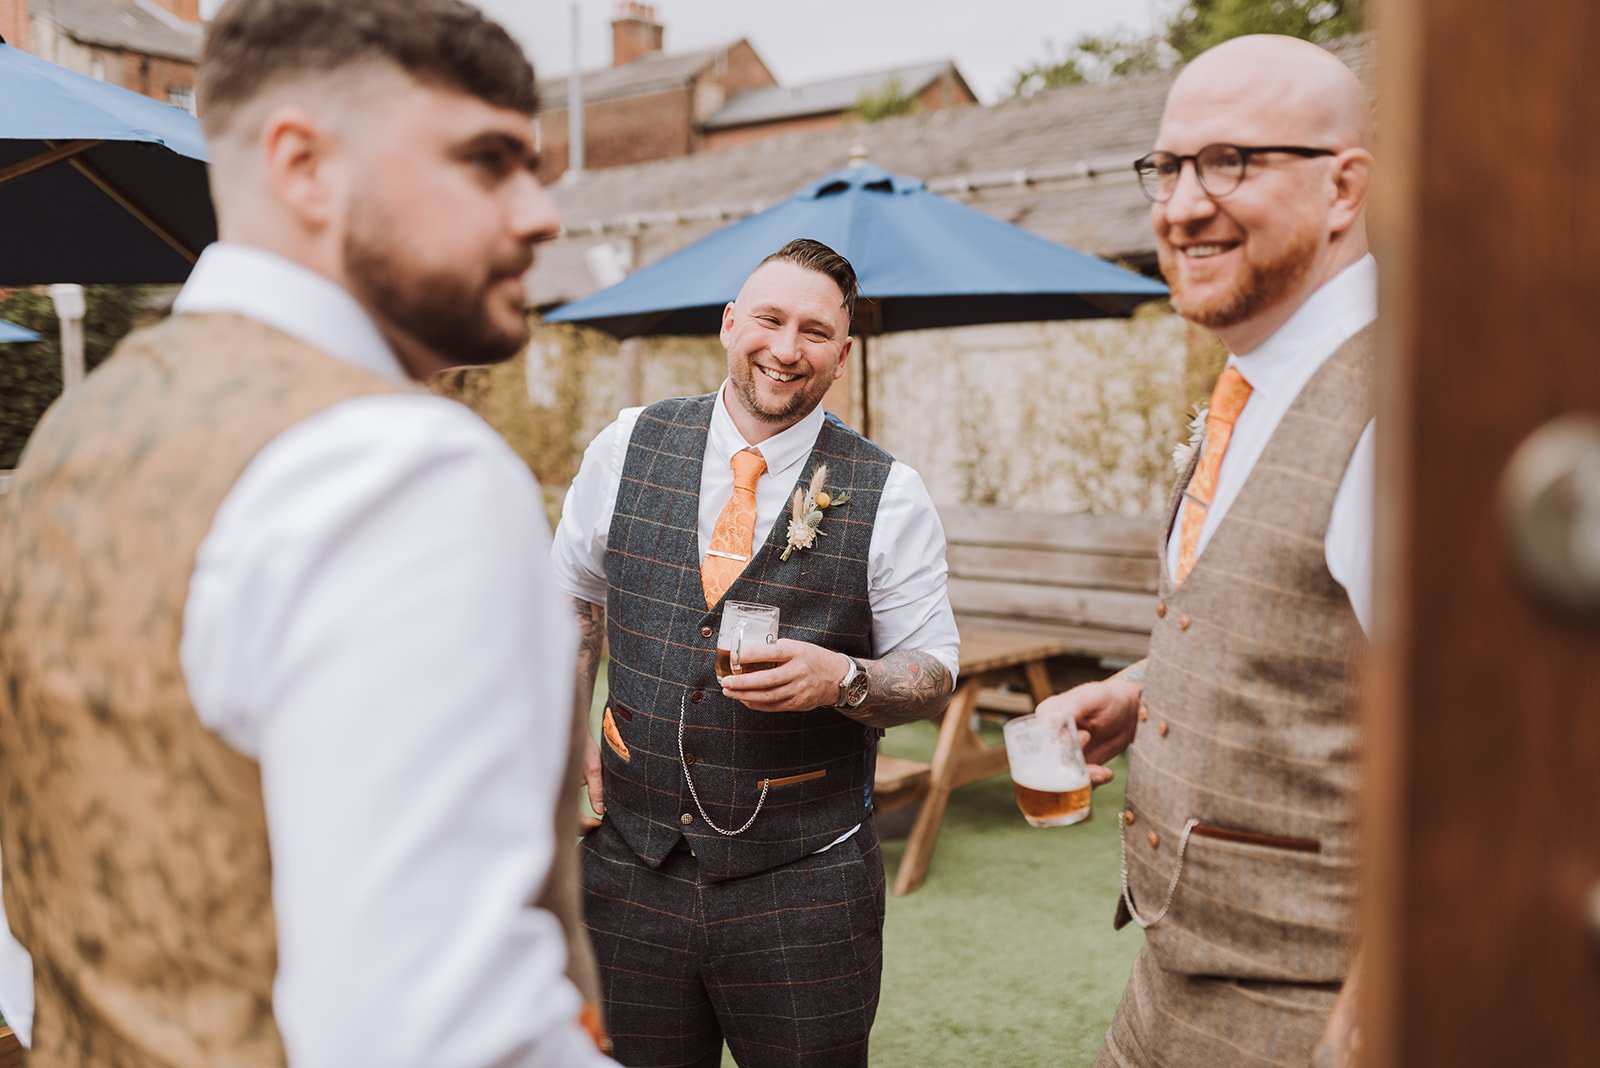 The groom laughing with friends